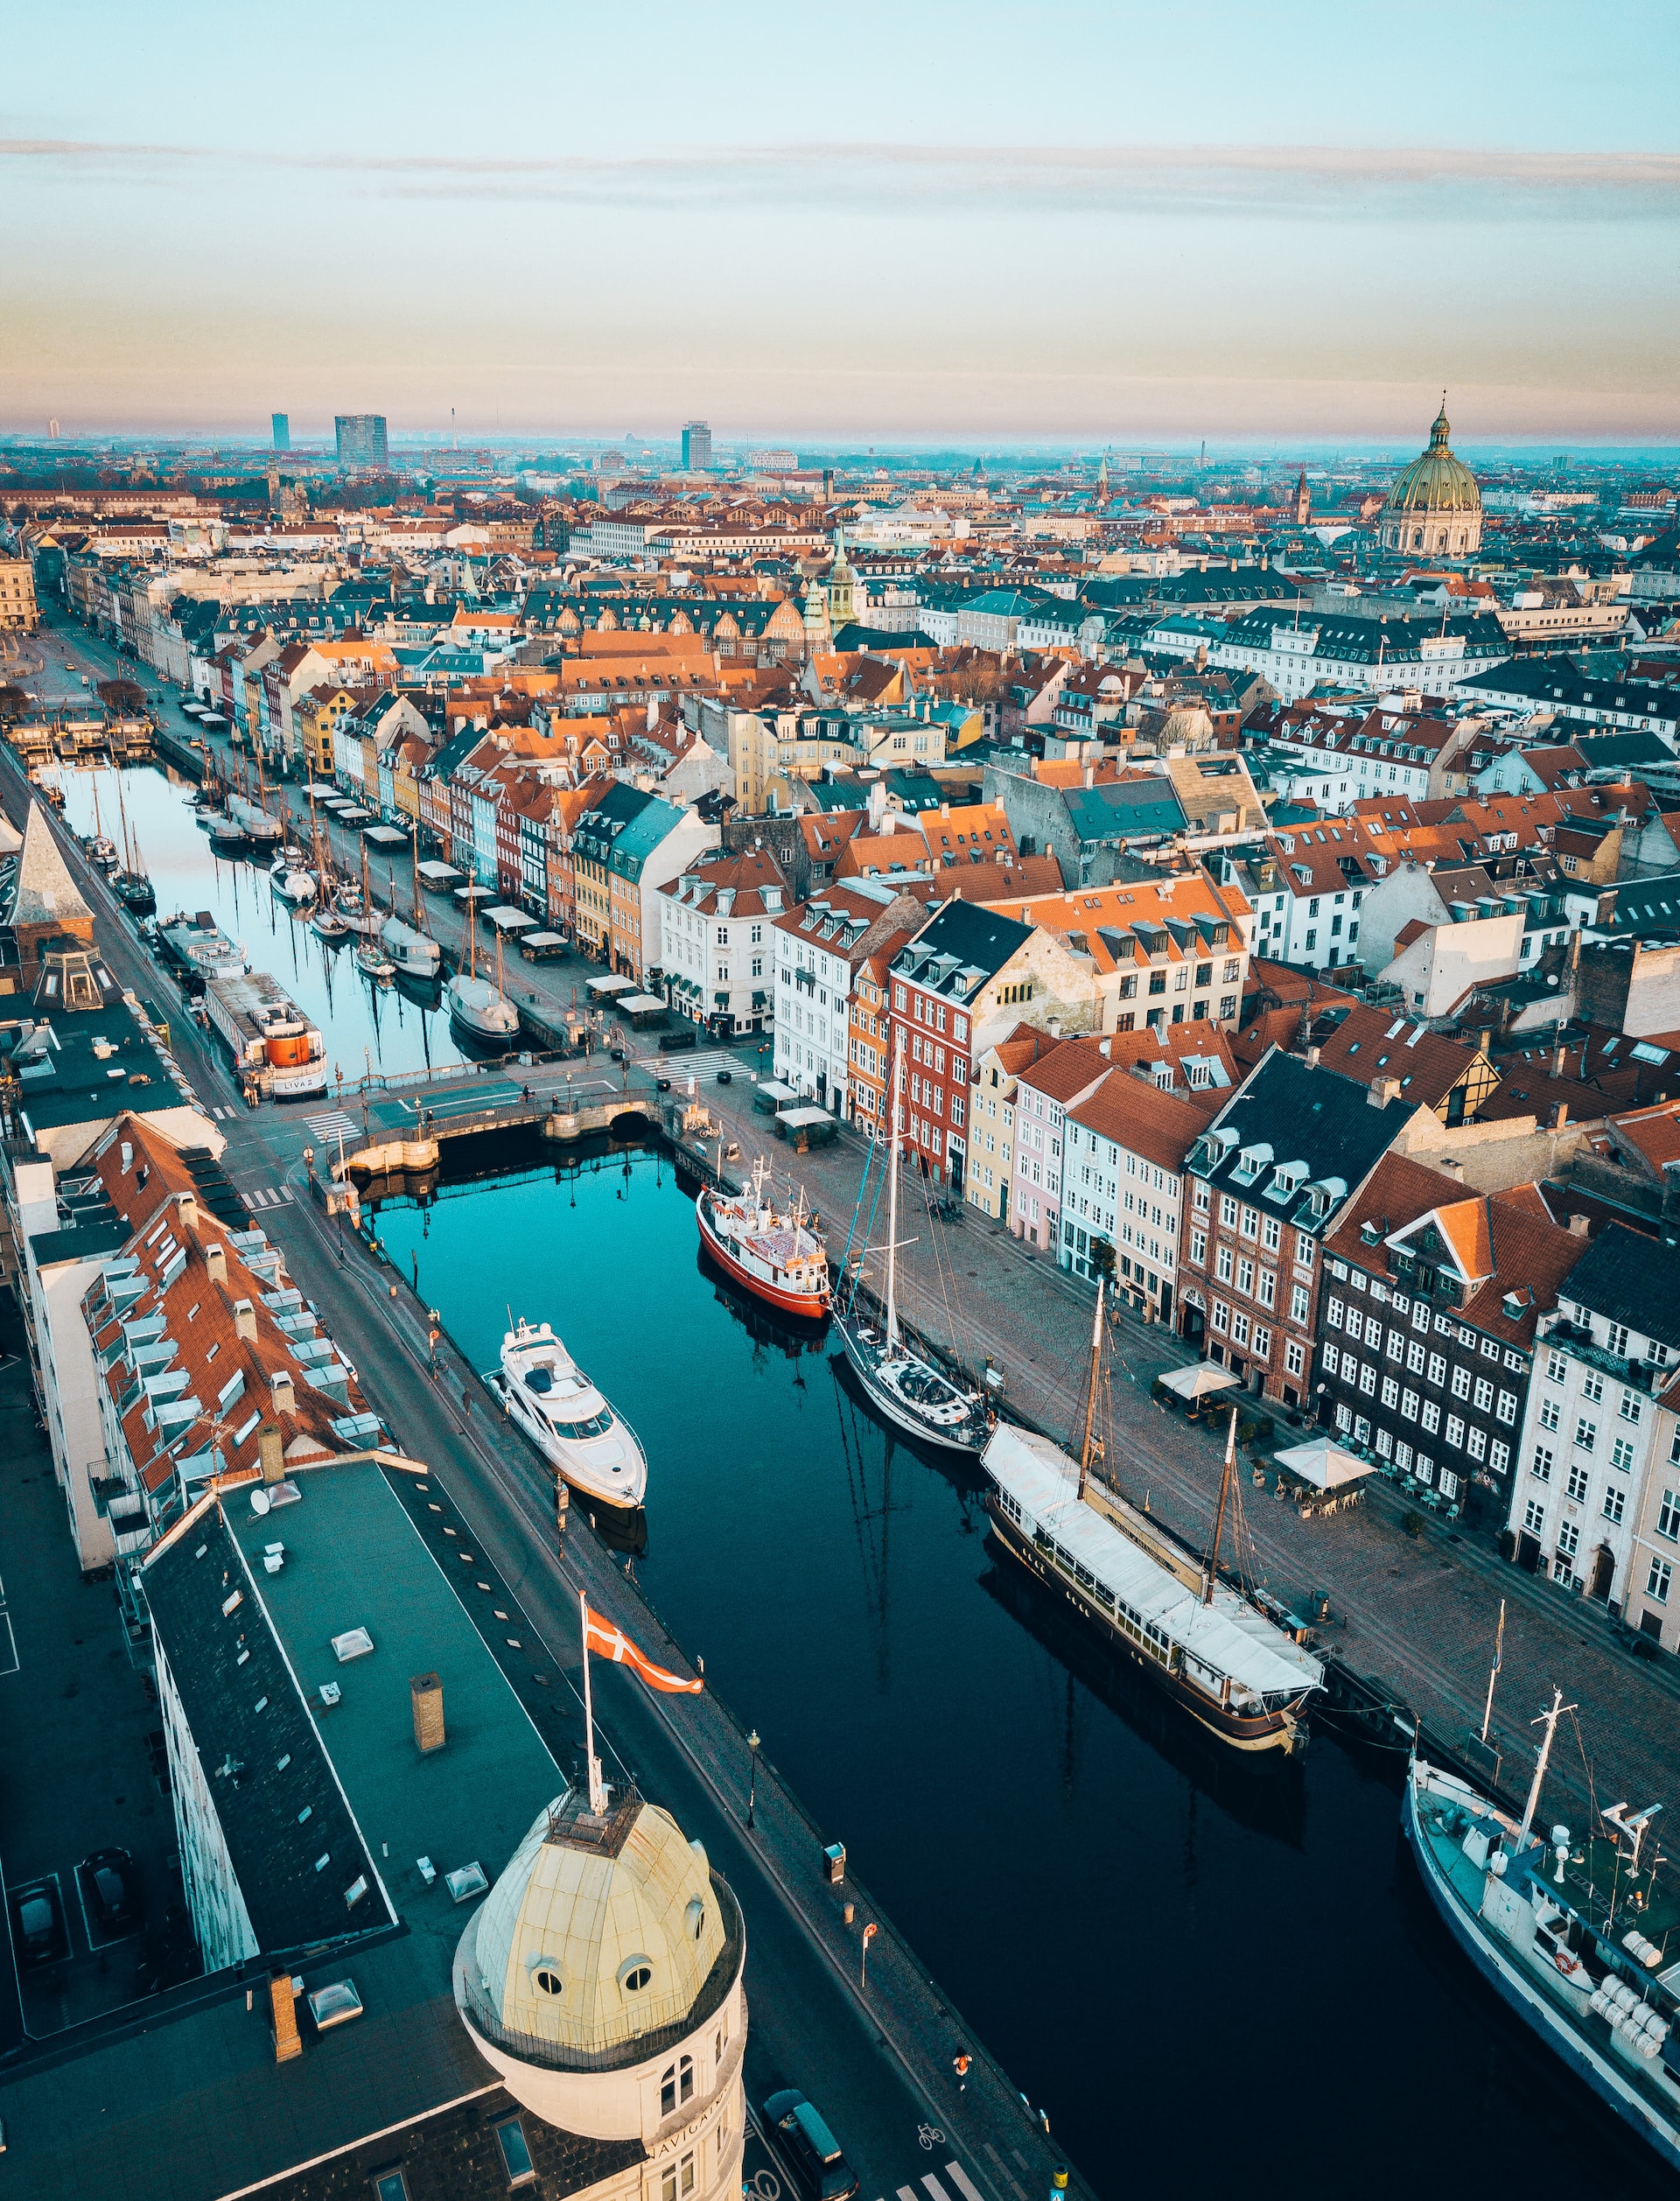 The first EEA-Eionet day takes place in Copenhagen